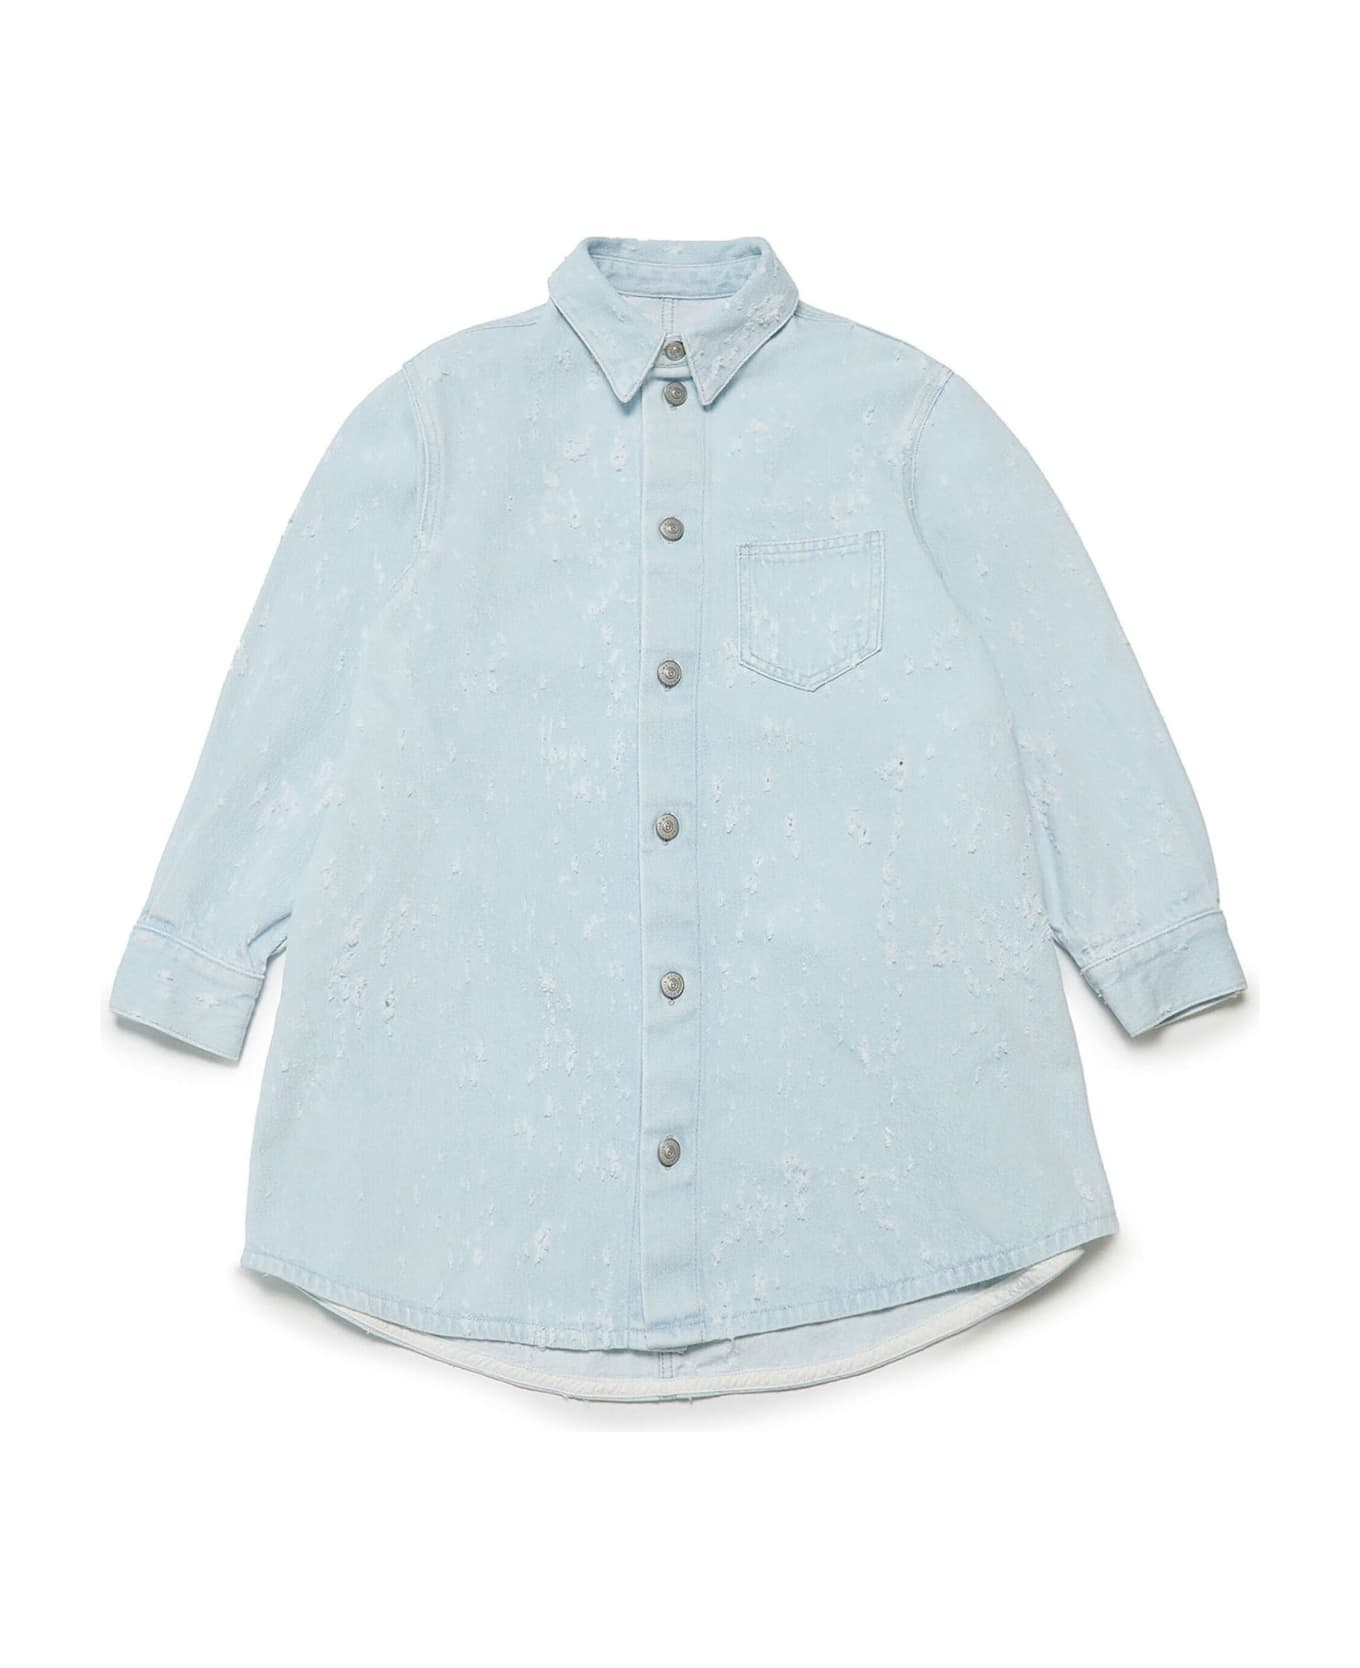 MM6 Maison Margiela Camicia In Jeans - Blue ボトムス